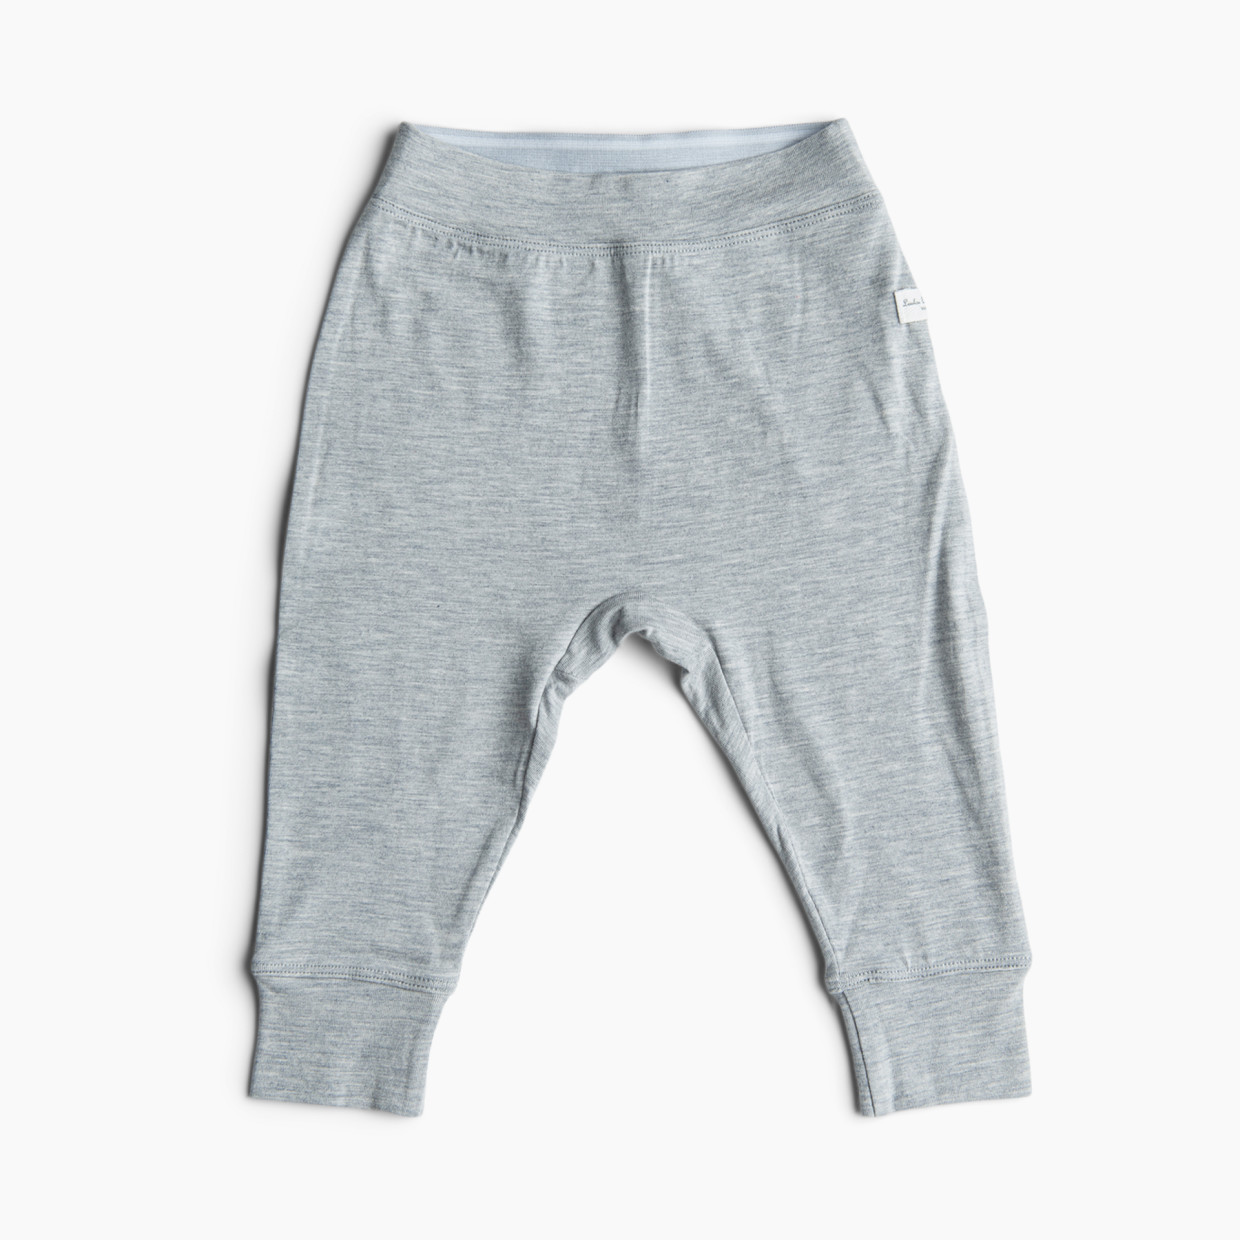 Loulou Lollipop Baby Pants - Heather Grey, 18-24 Months.